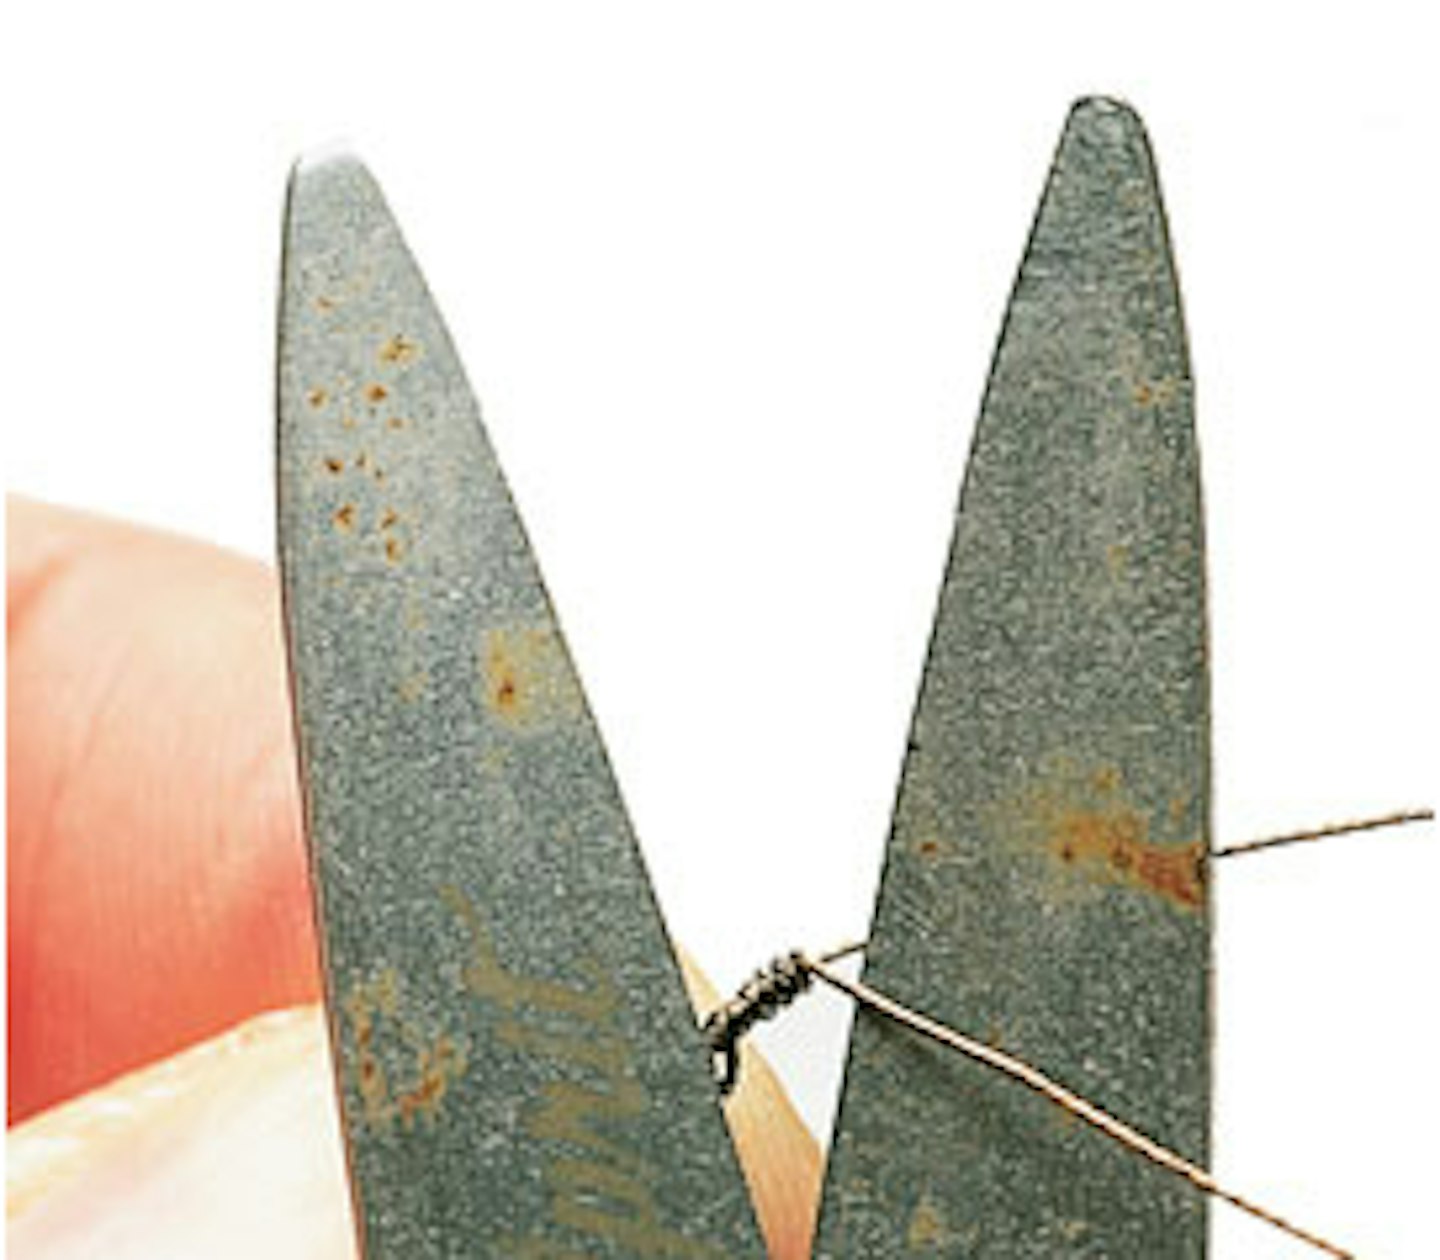 5. Trim off the tag end as close as you can to the whippings using sharp, reliable wire cutters.